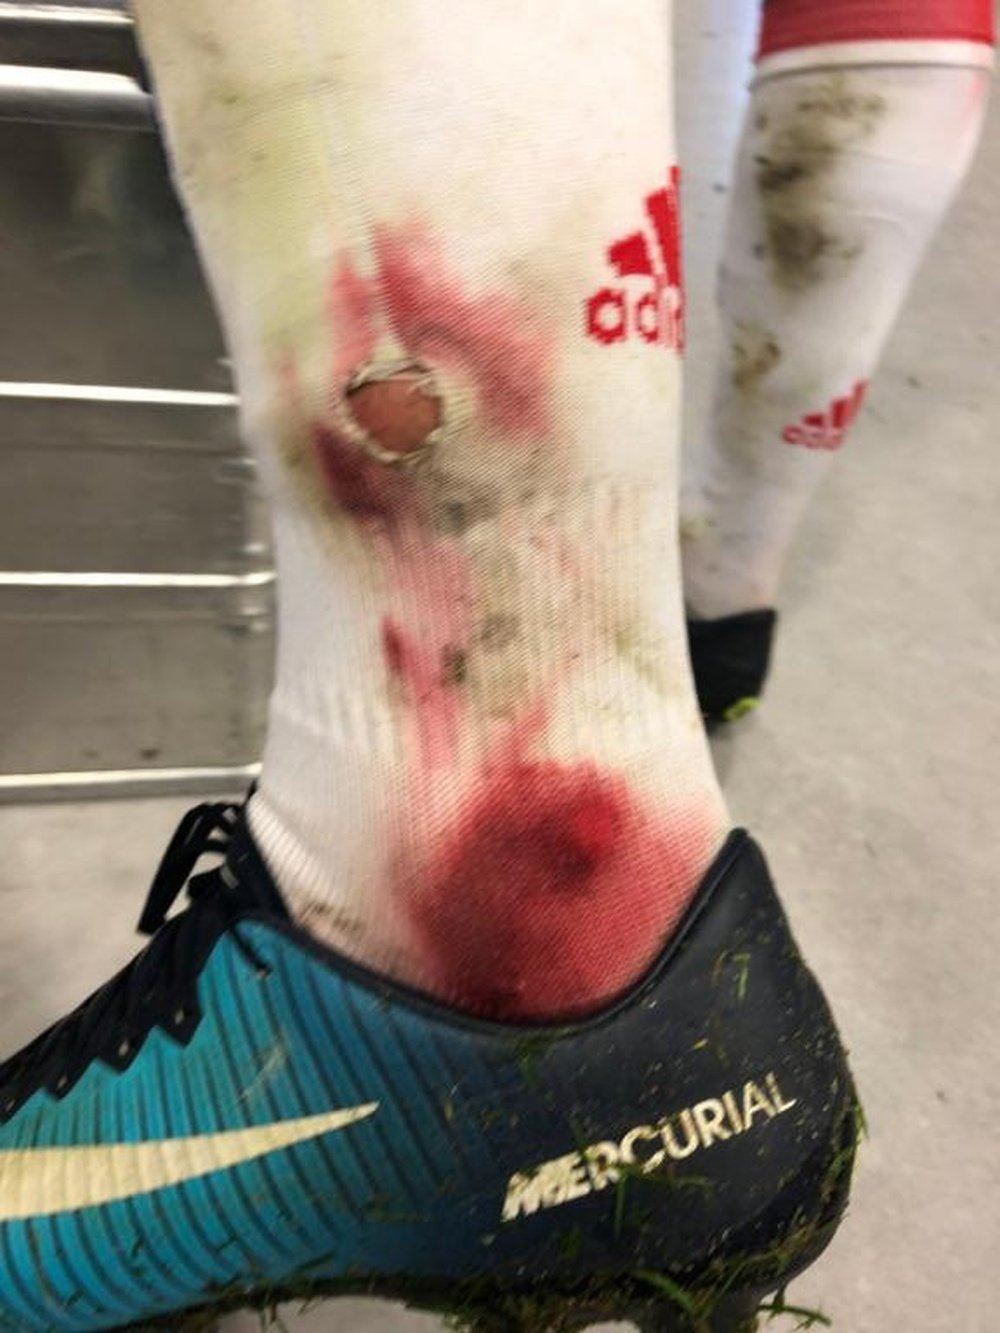 Fekir was left with a heavily bloodied ankle. Twitter